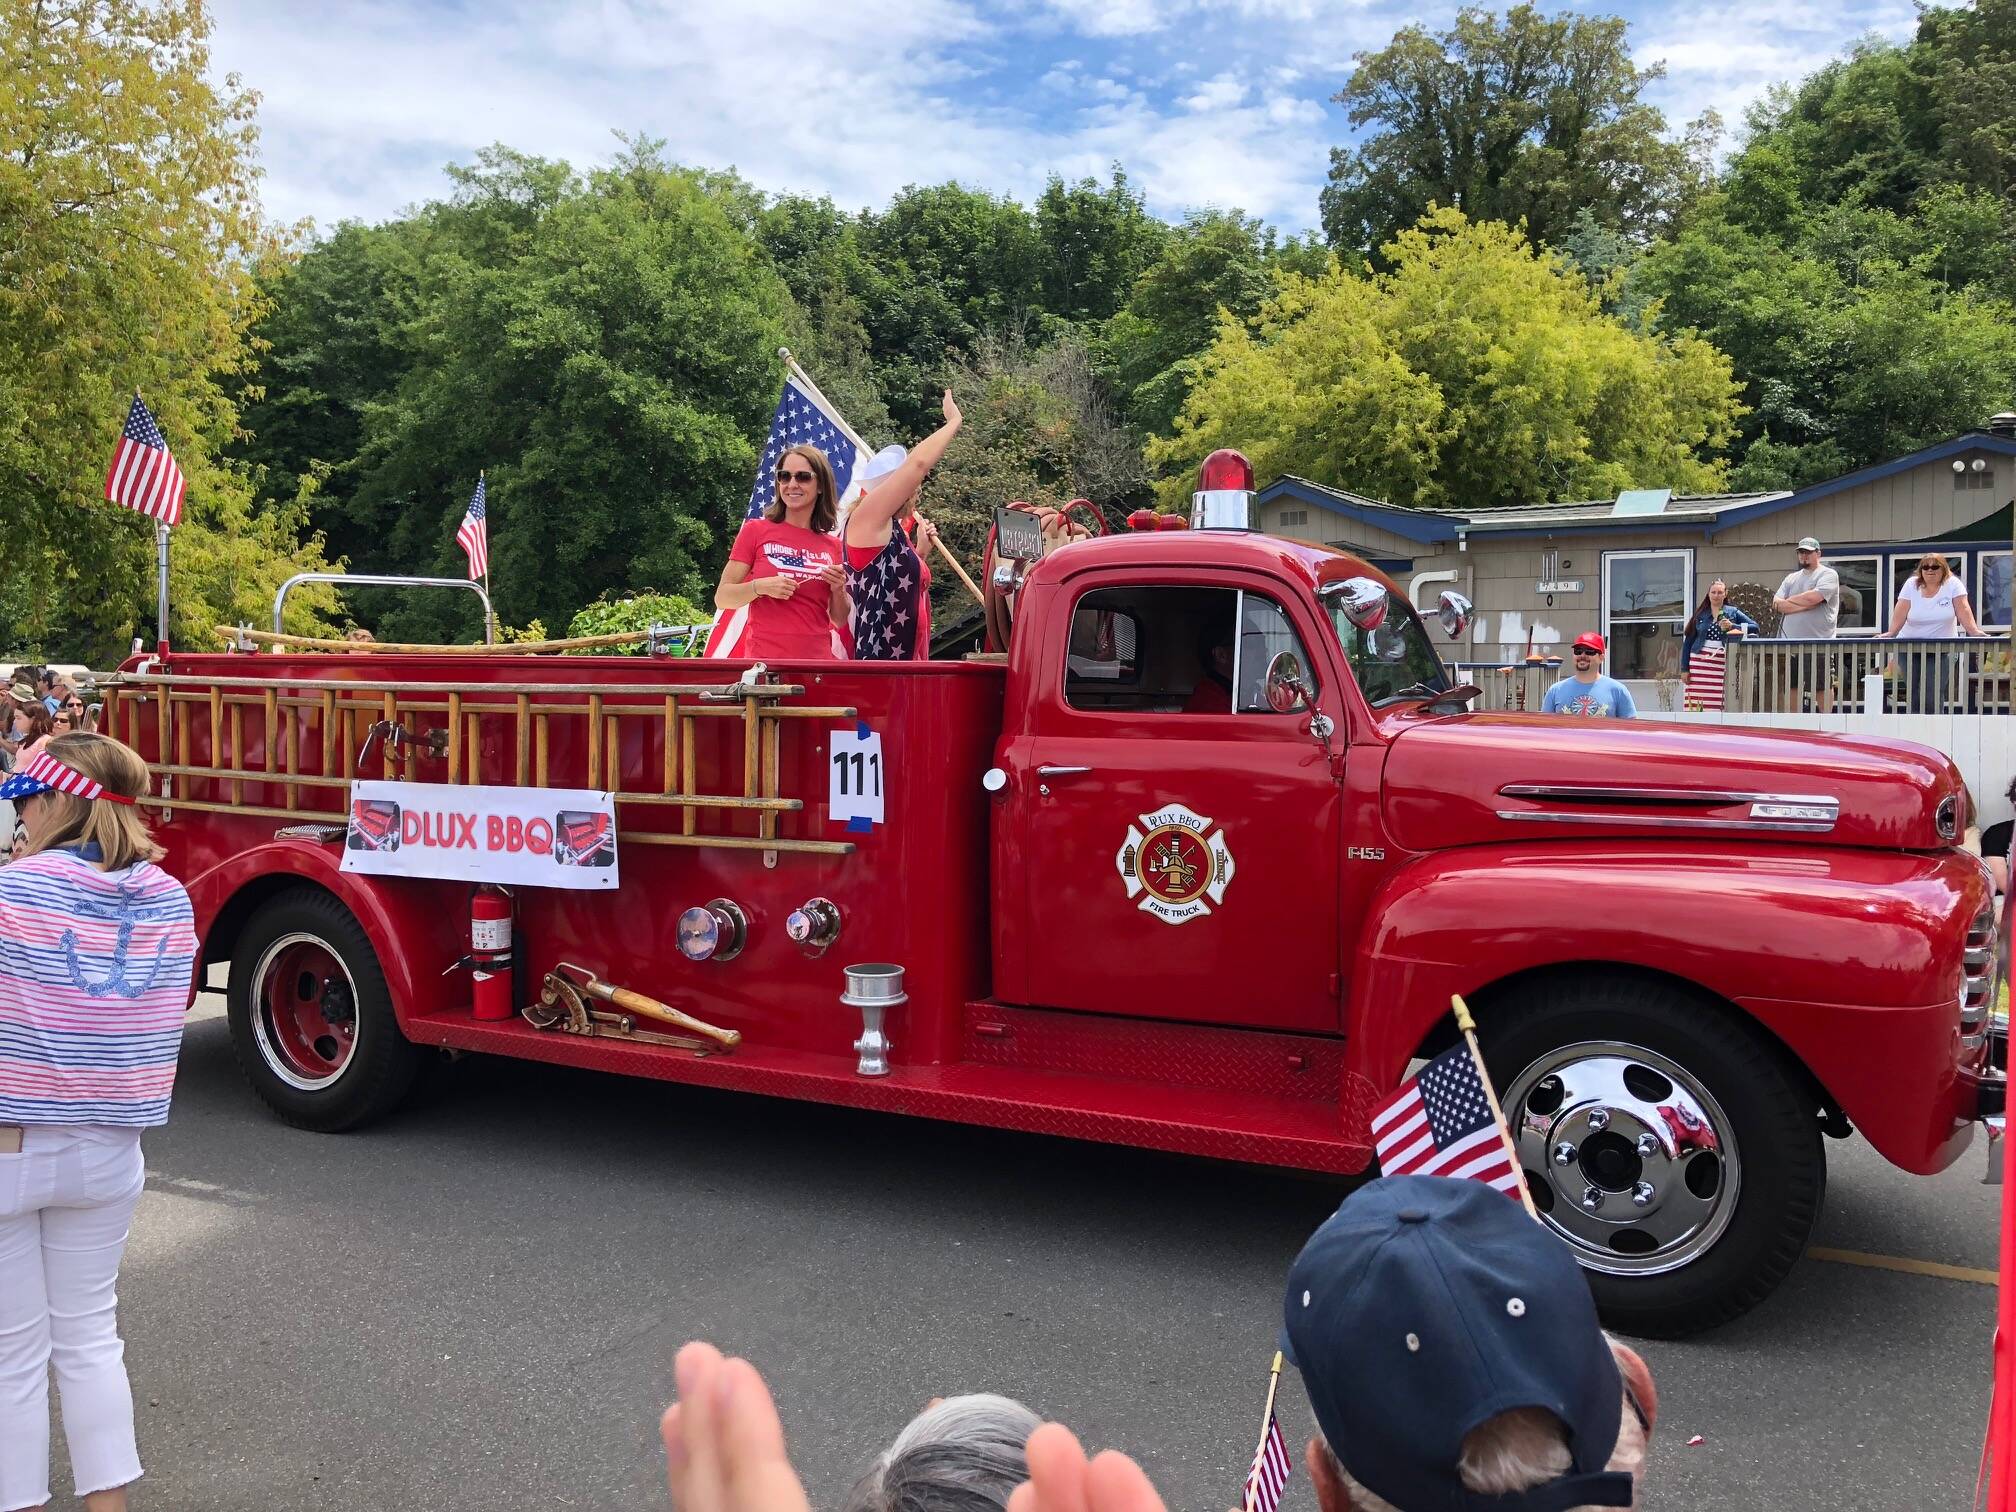 Photos provided
Participants at a former Maxwelton Fourth of July Parade in 2018.